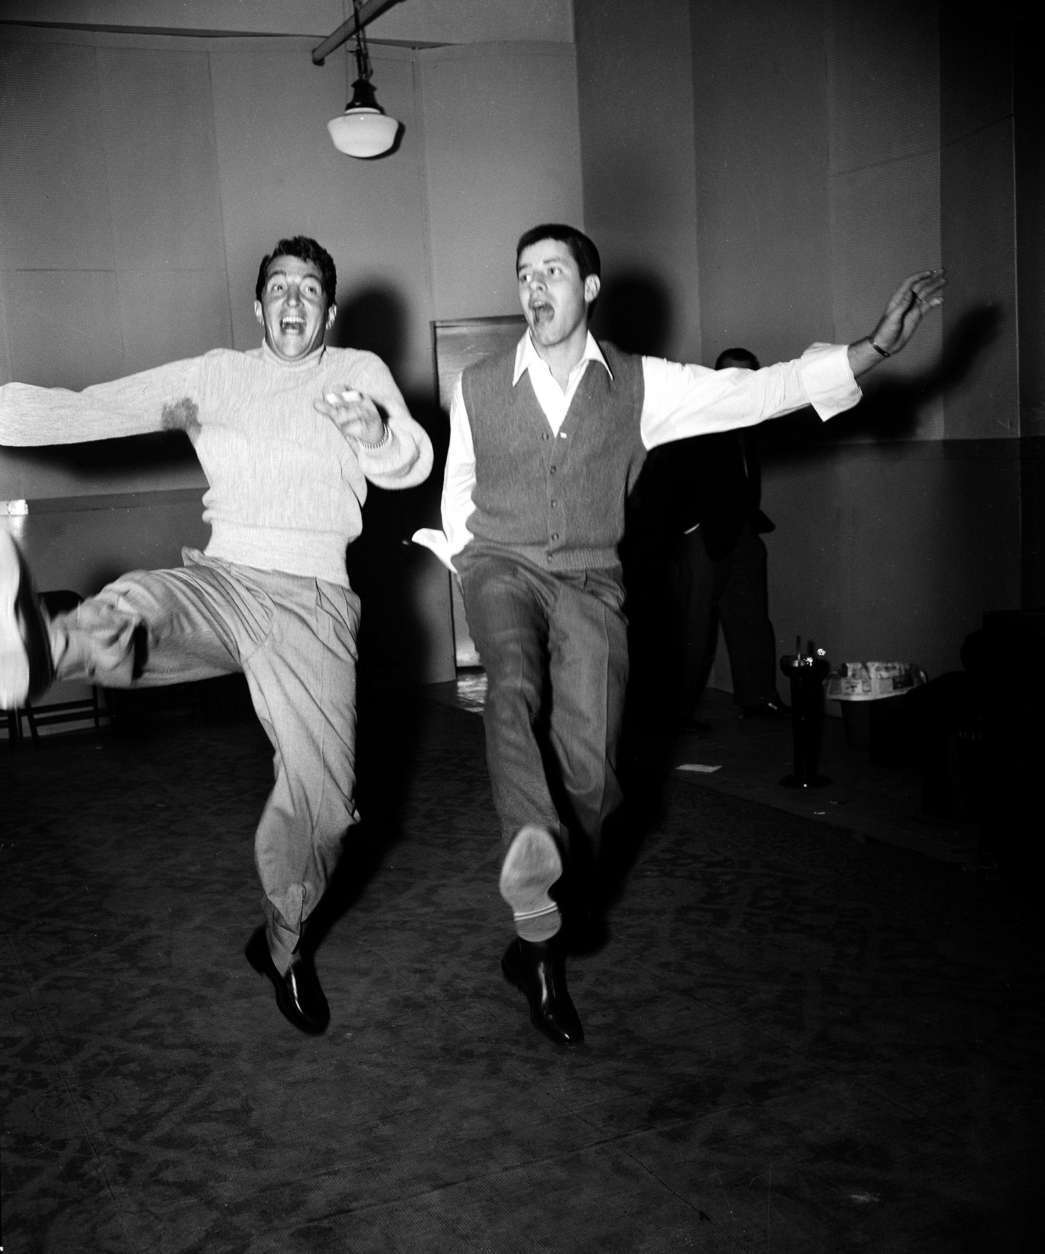 Comedy duo Dean Martin, left, and Jerry Lewis rehearse at the Nola Studios in New York City for their opening at the Copacabana, Jan. 20, 1954.  (AP Photo/Dan Grossi)